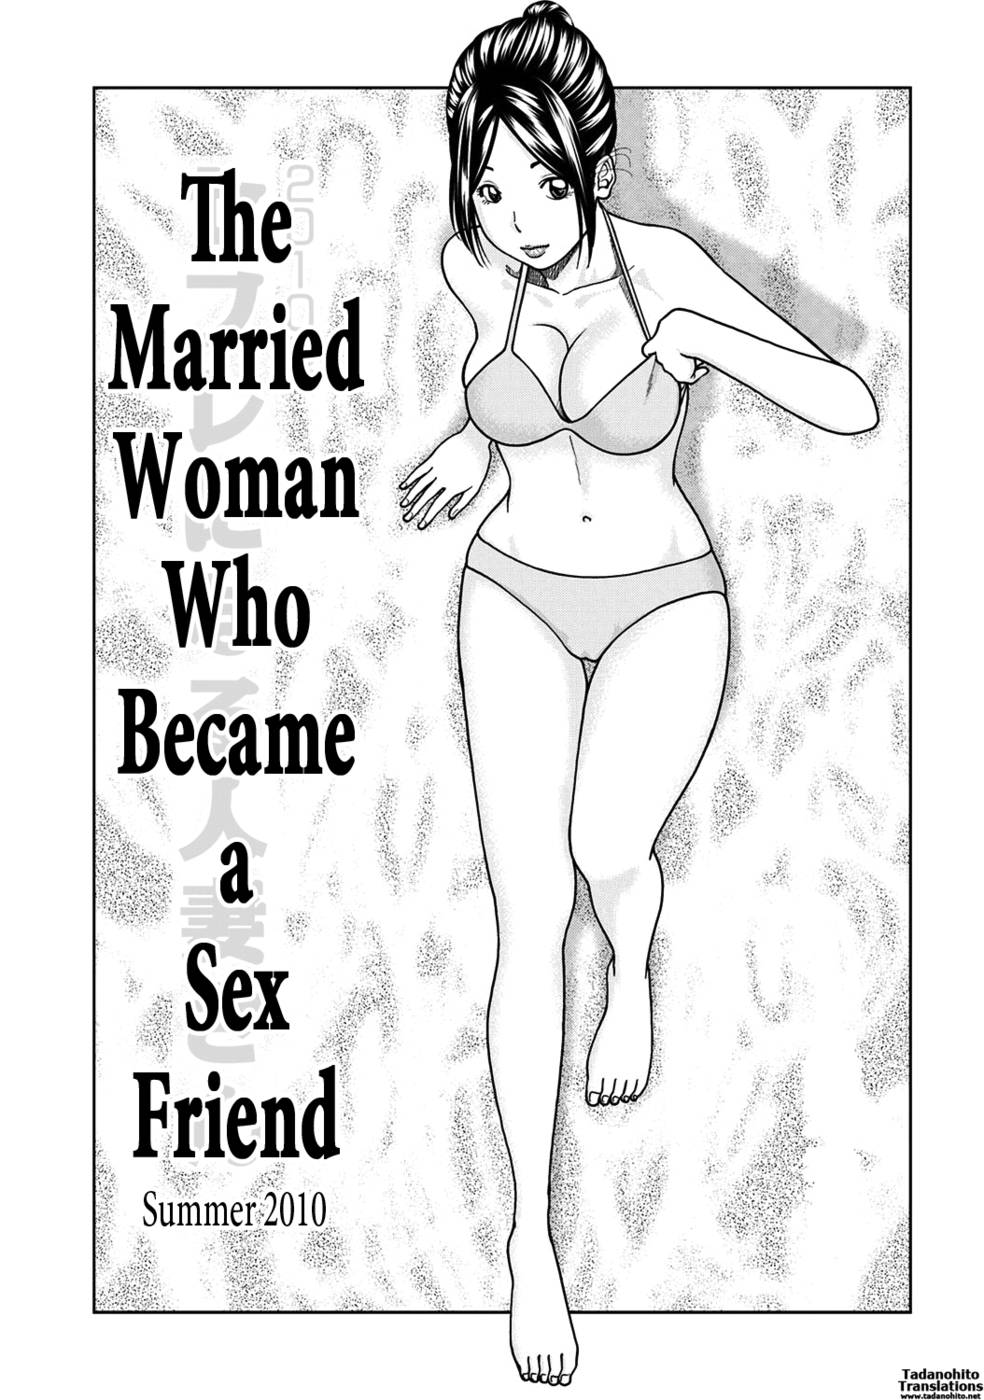 33 Year Old Unsatisfied Wife-Chapter 7-The Married Woman Who Became A Sex Friend-Hentai Manga Hentai Comic pic picture